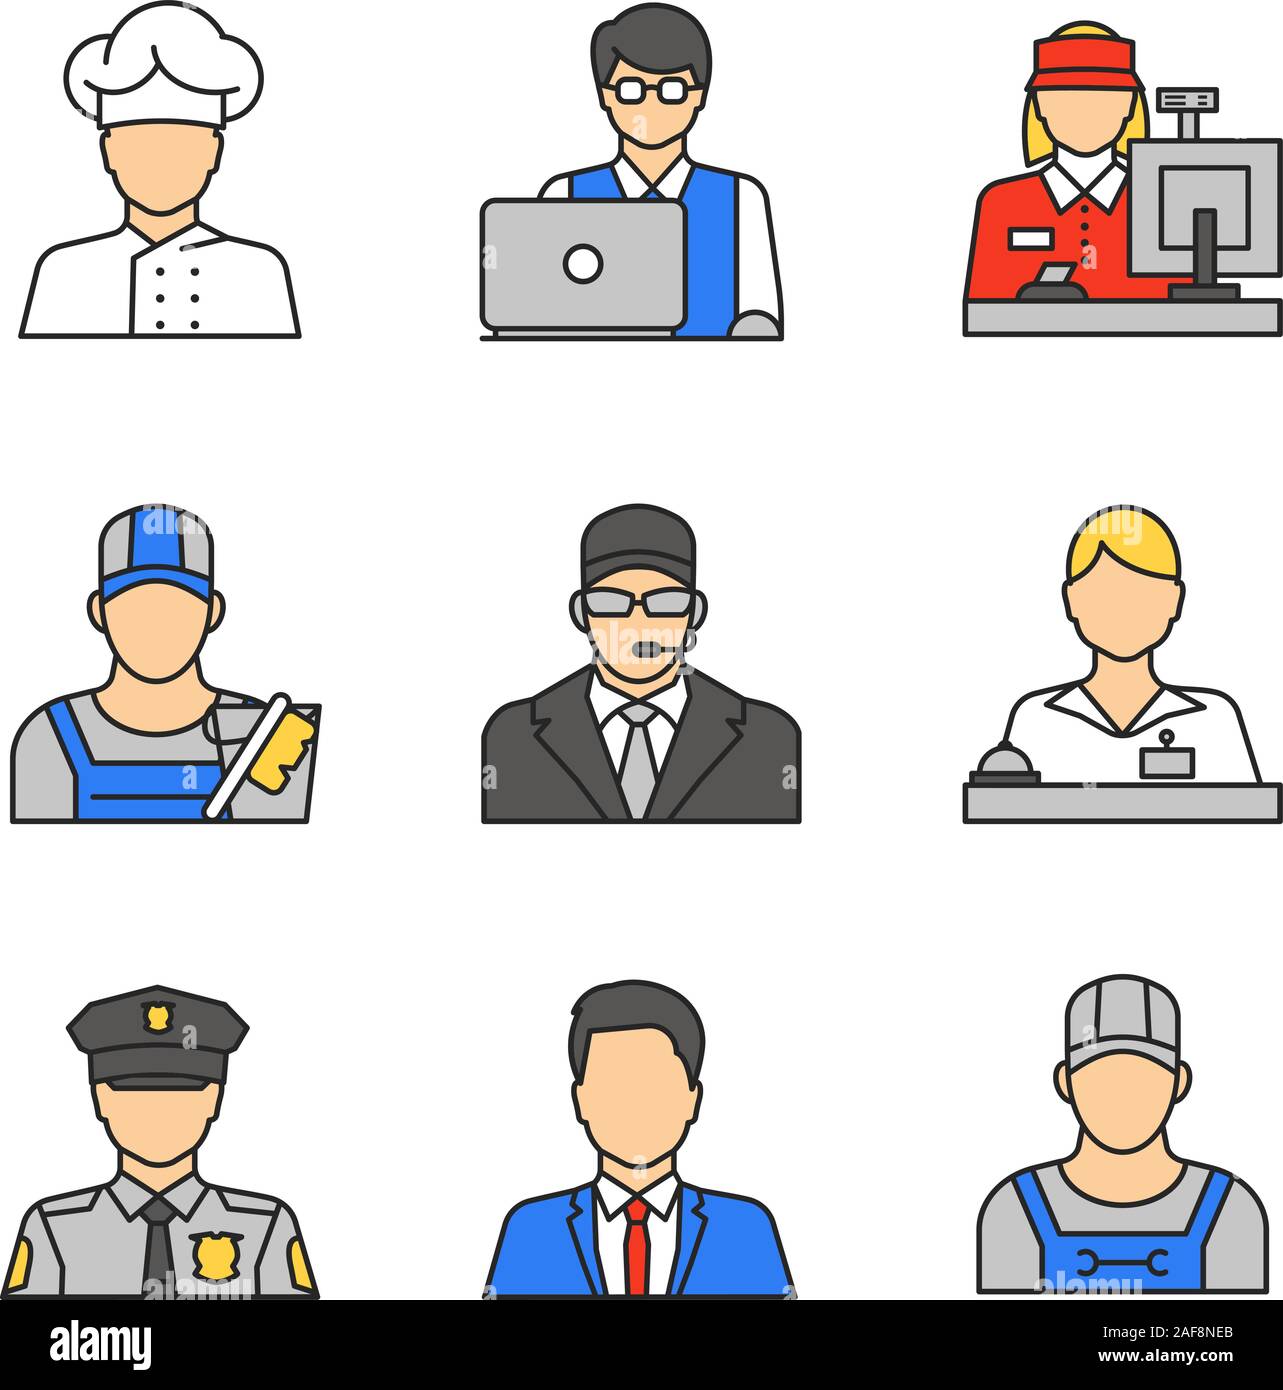 Professions color icons set. Occupations. IT technologist, cashier, cleaner, bodyguard, receptionist, policeman, office worker, plumber, cook. Isolate Stock Vector